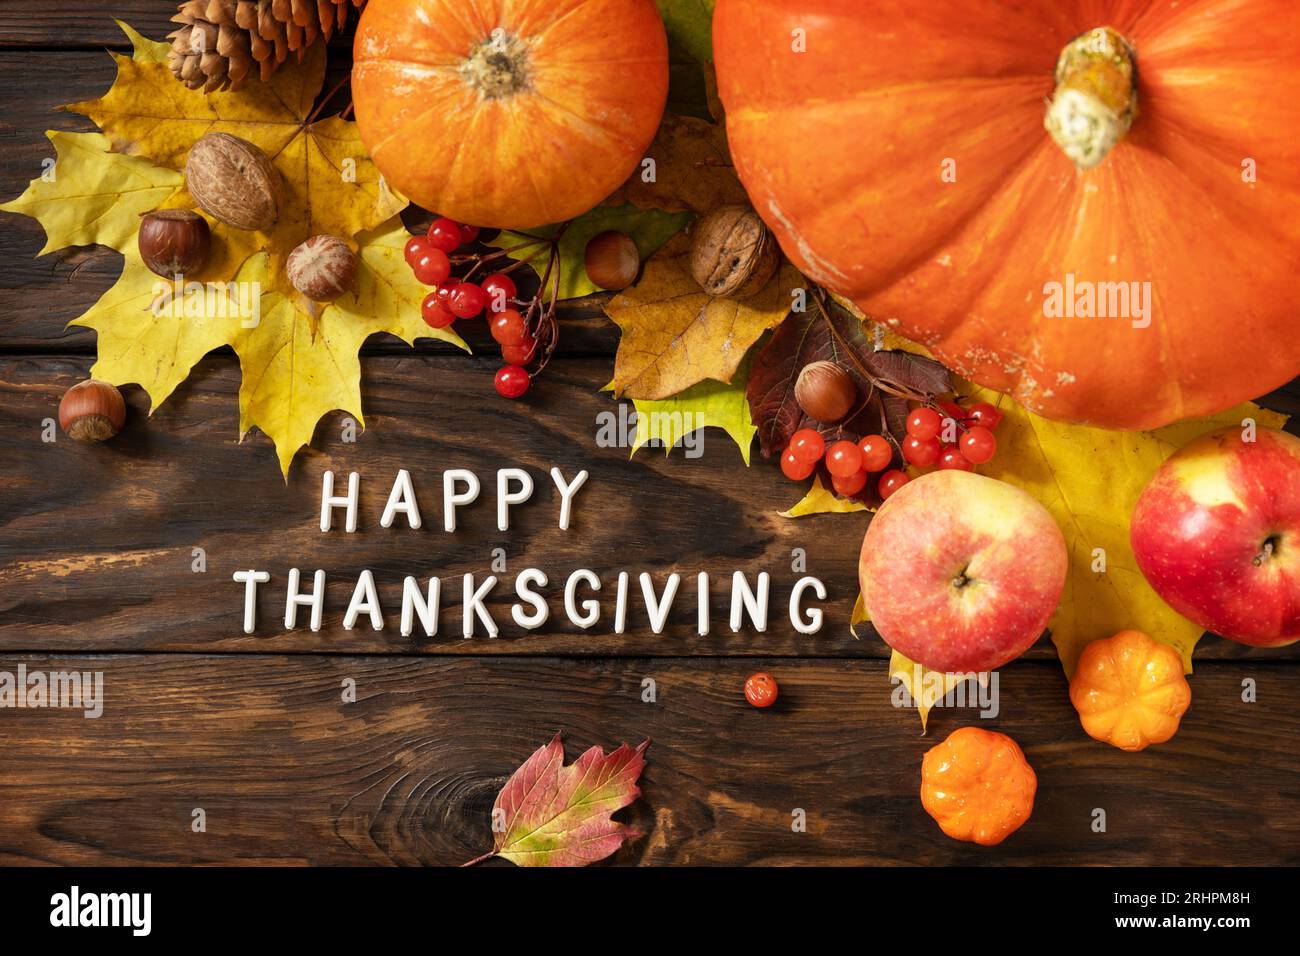 Autumn Day Thanksgiving background. Festive autumn decor from ripe pumpkins, berries and leaves on a wooden background. View from above. Stock Photo